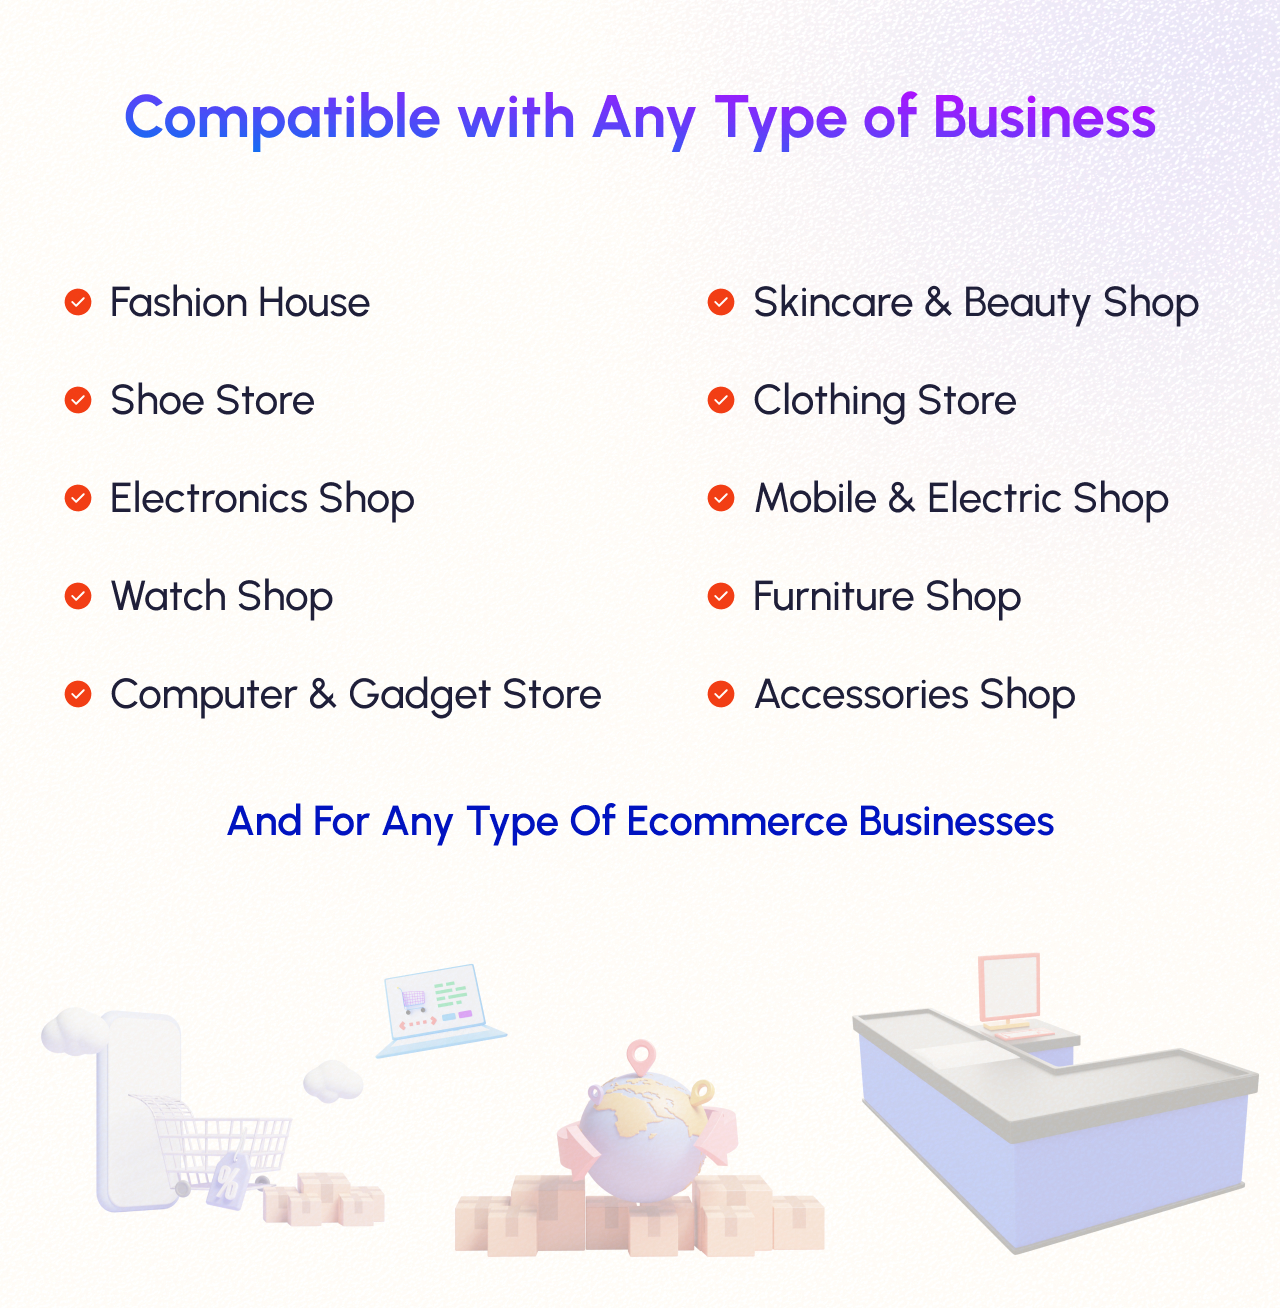 compatible for fasion house eCommerce, shoes store, skincare & beauity shop, clothing store, Electronic Shops etc